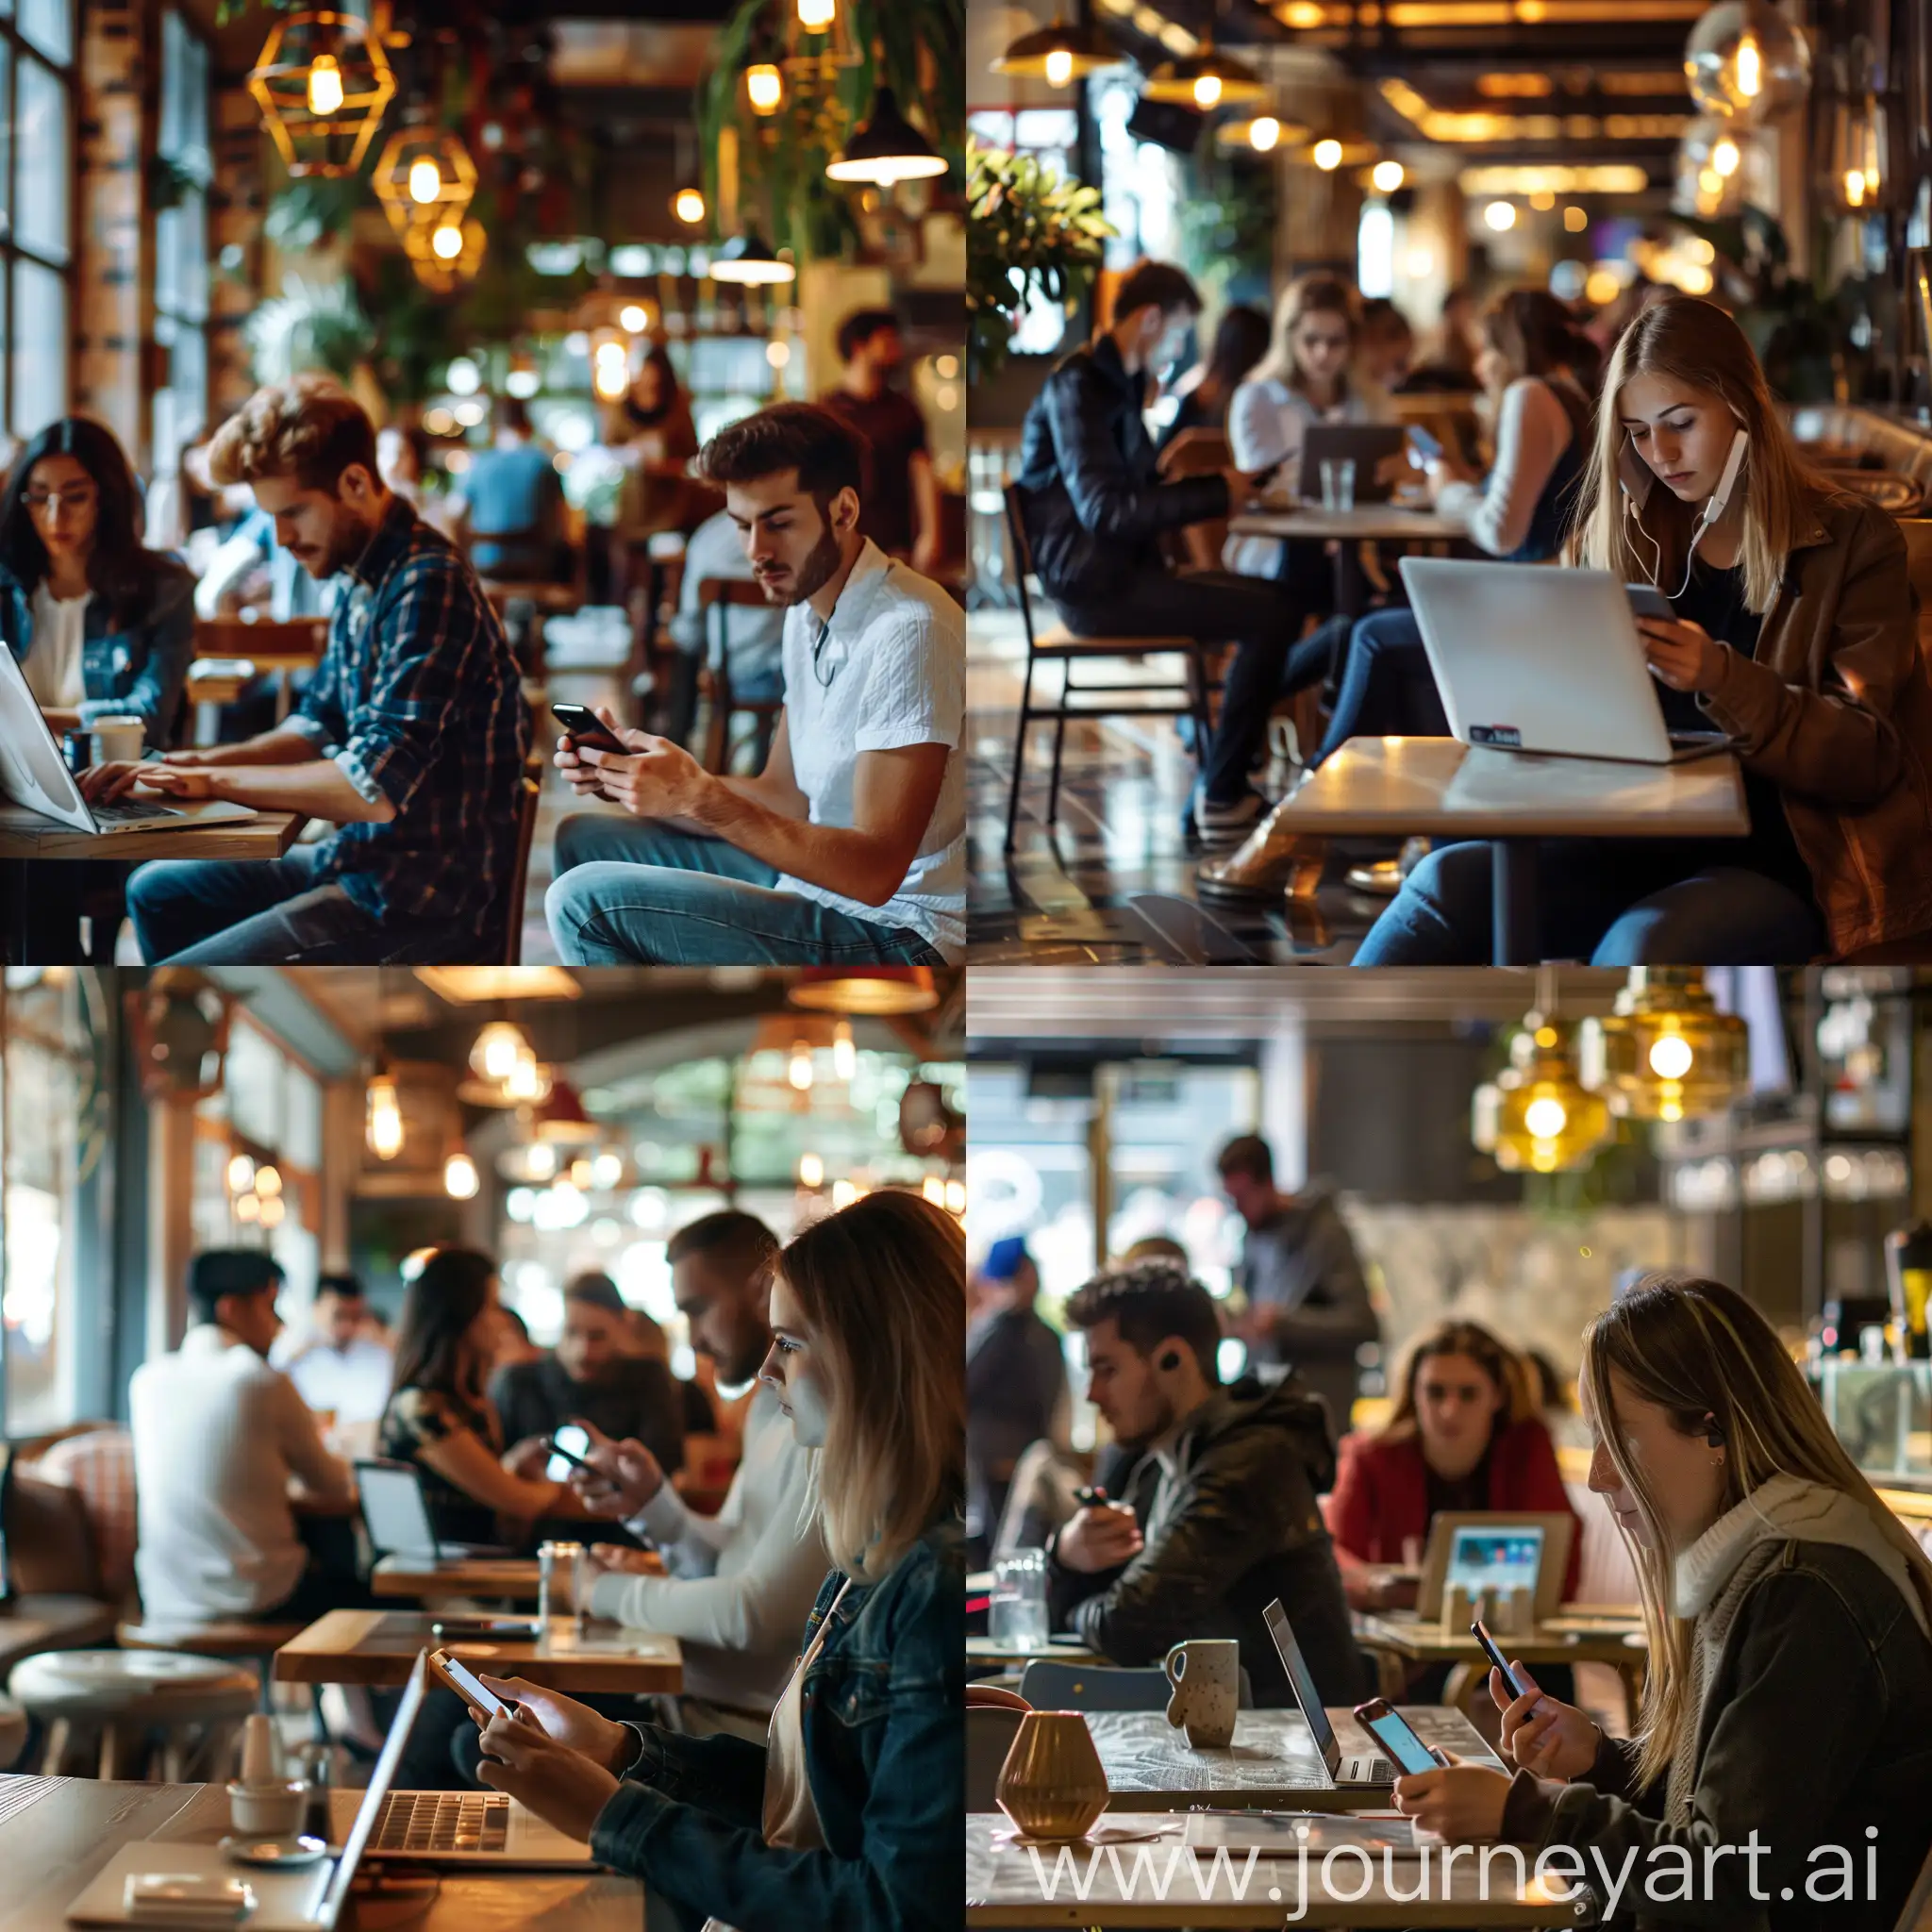 People sitting in a restaurant using their phones and laptop in the foreground while another group of people are seriously interacting